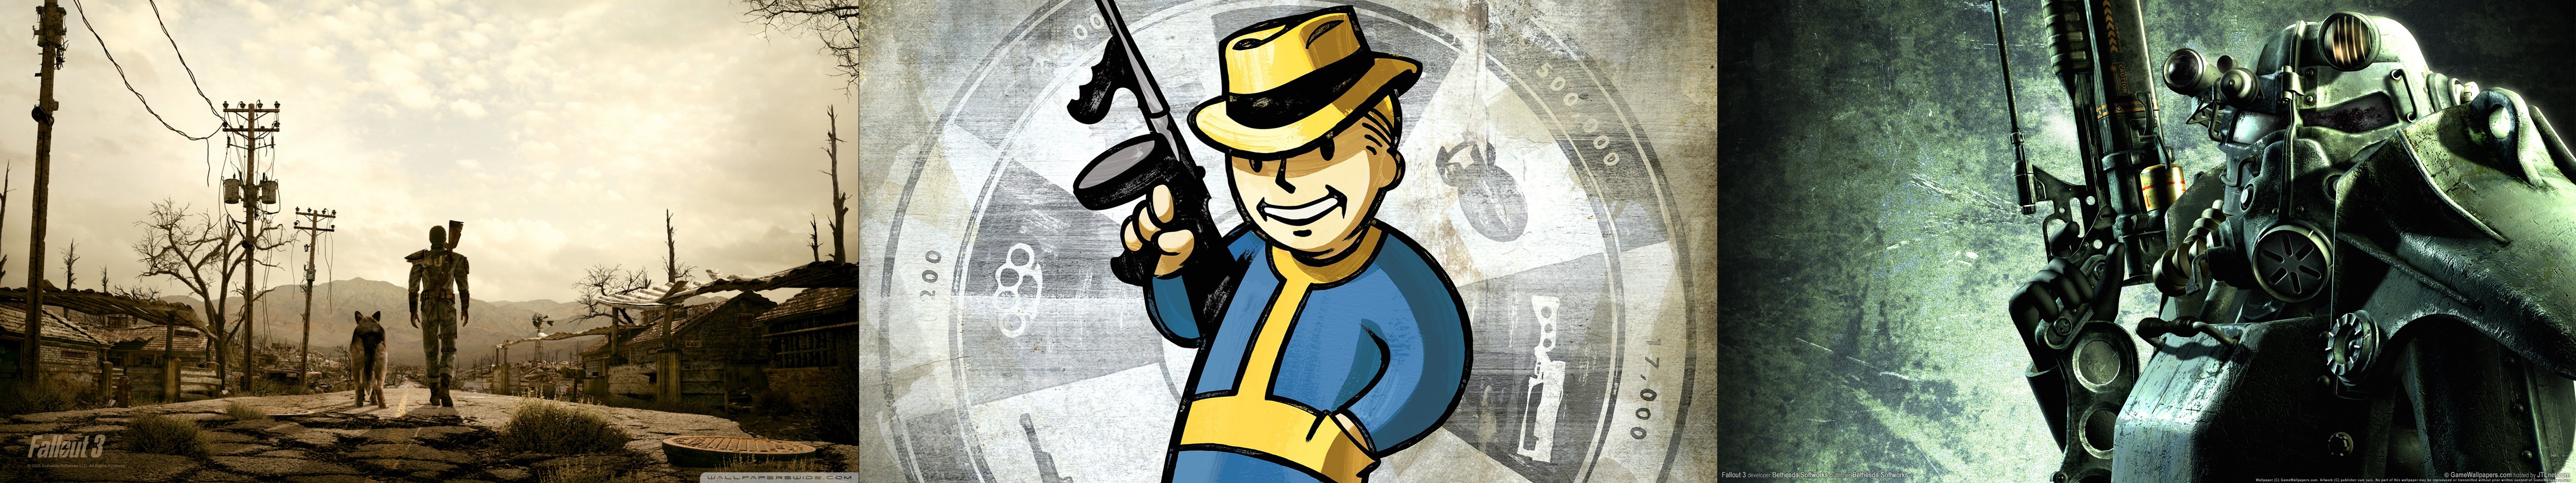 Dual Monitor Fallout Wallpapers